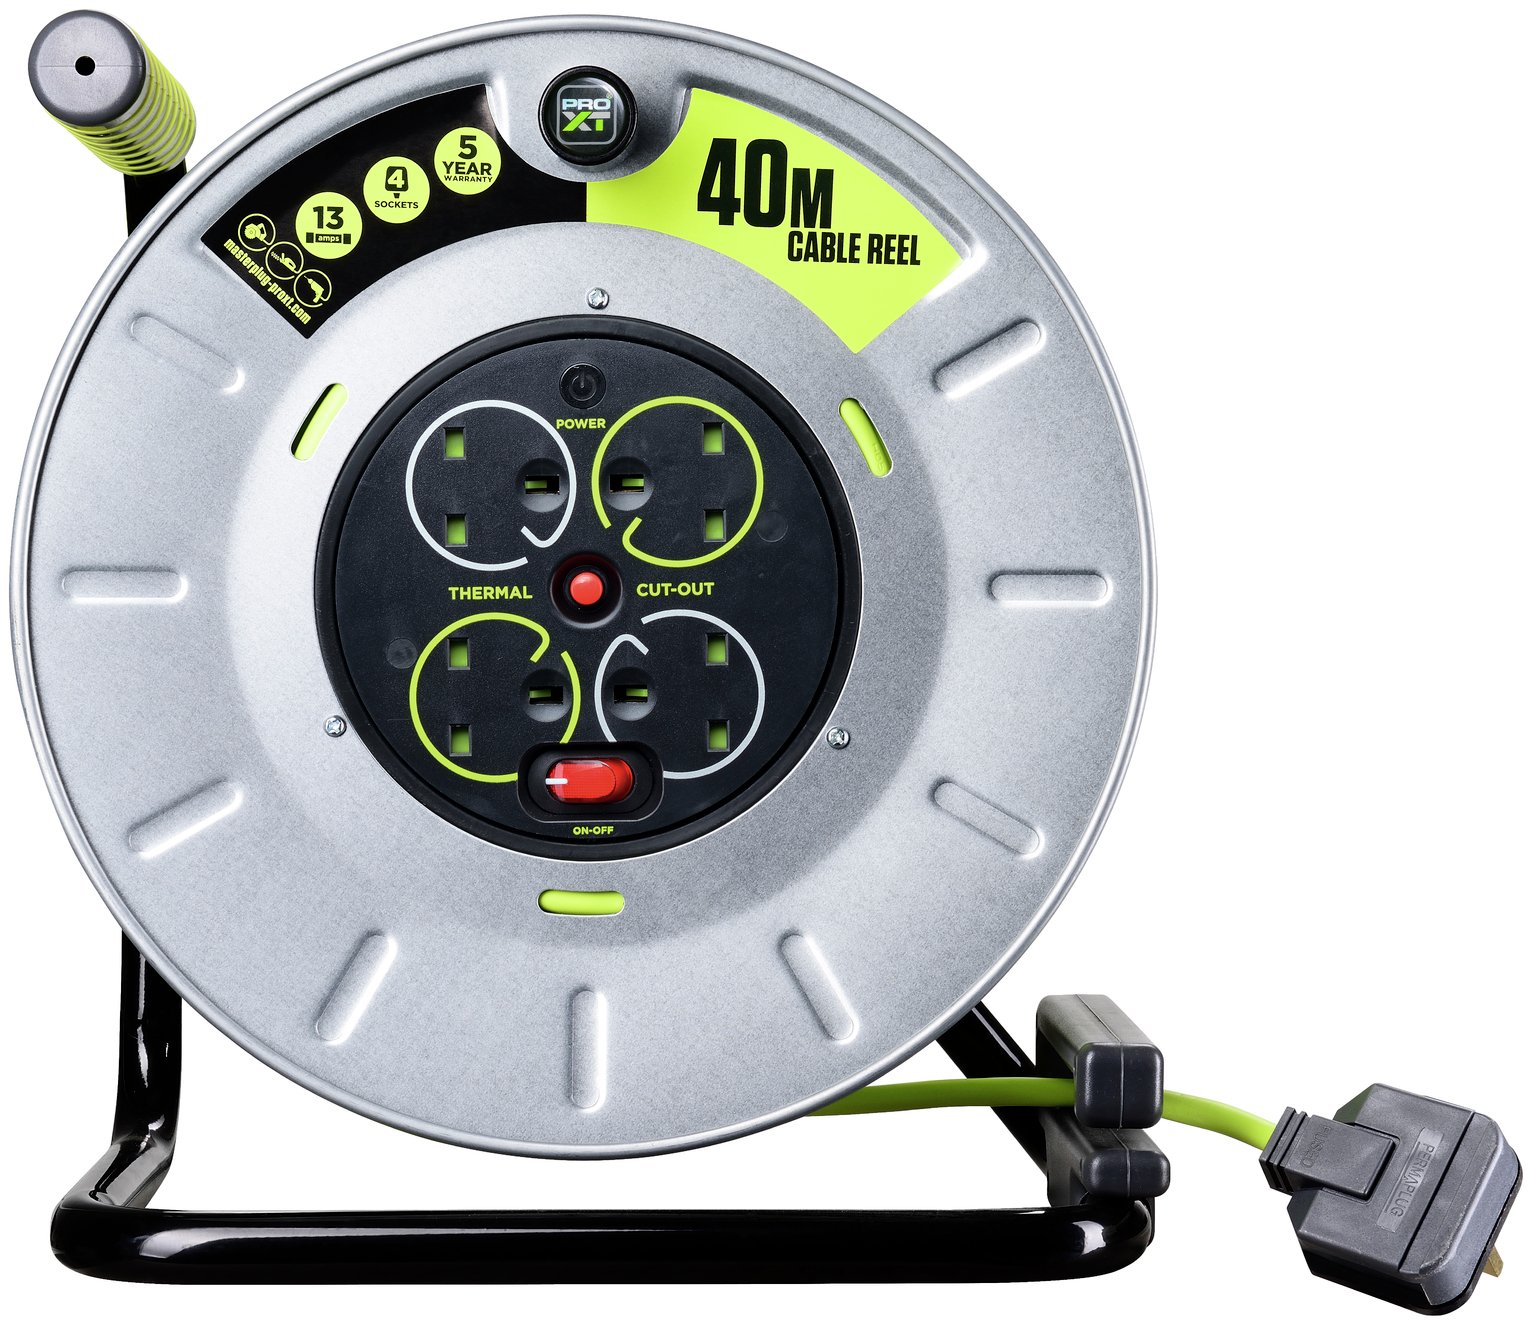 Masterplug Pro-XT 4 Socket Cable Reel review